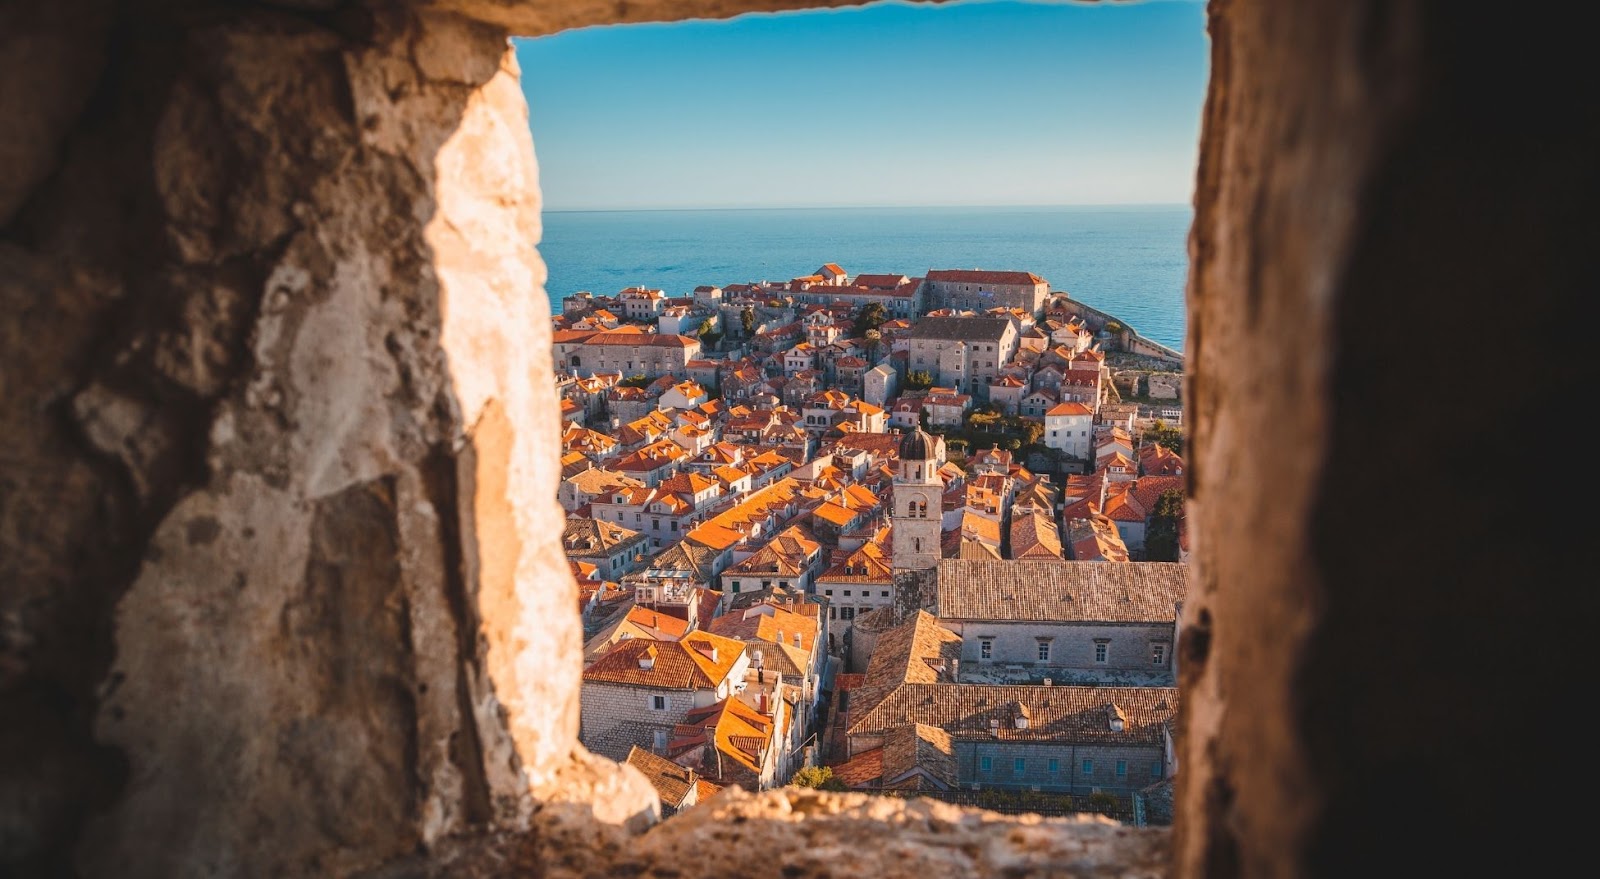 View through window of Dubrovnik's historic Old Town